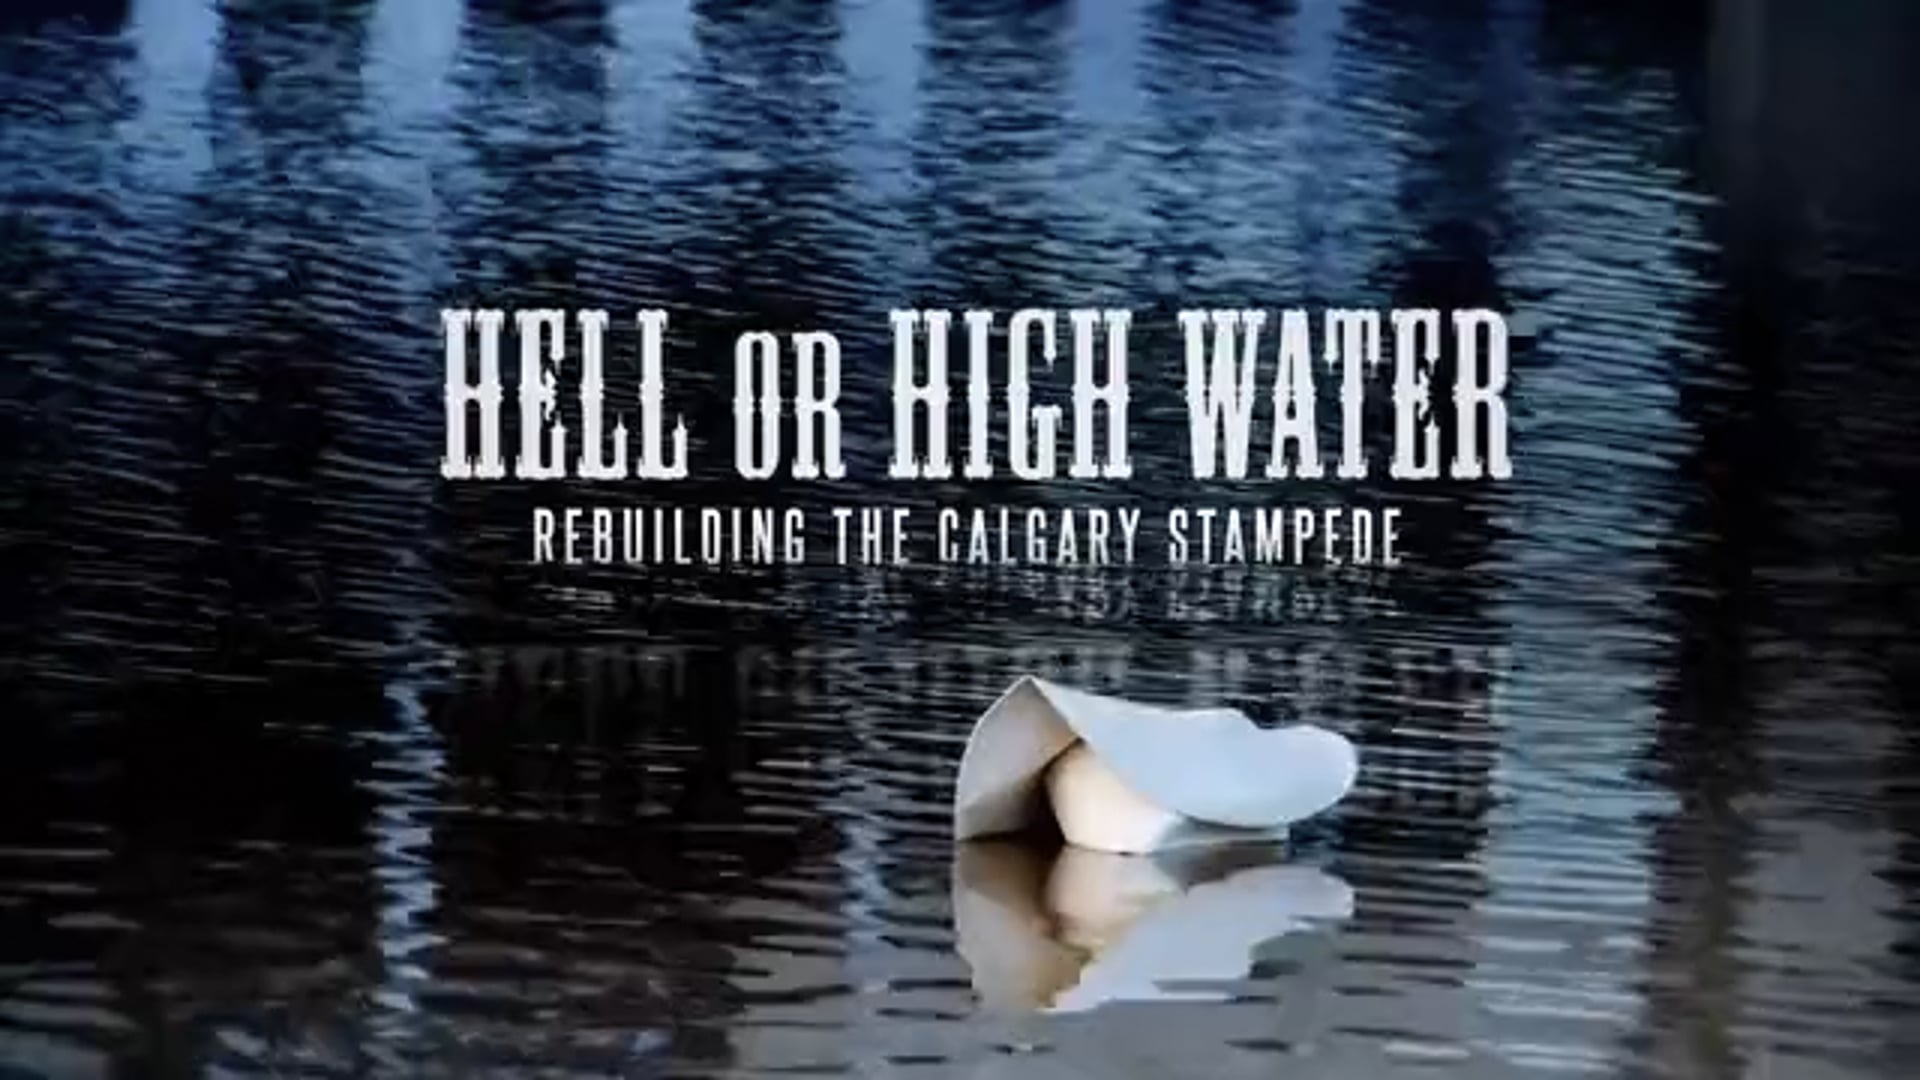 Hell or High Water: Rebuilding the Calgary Stampede